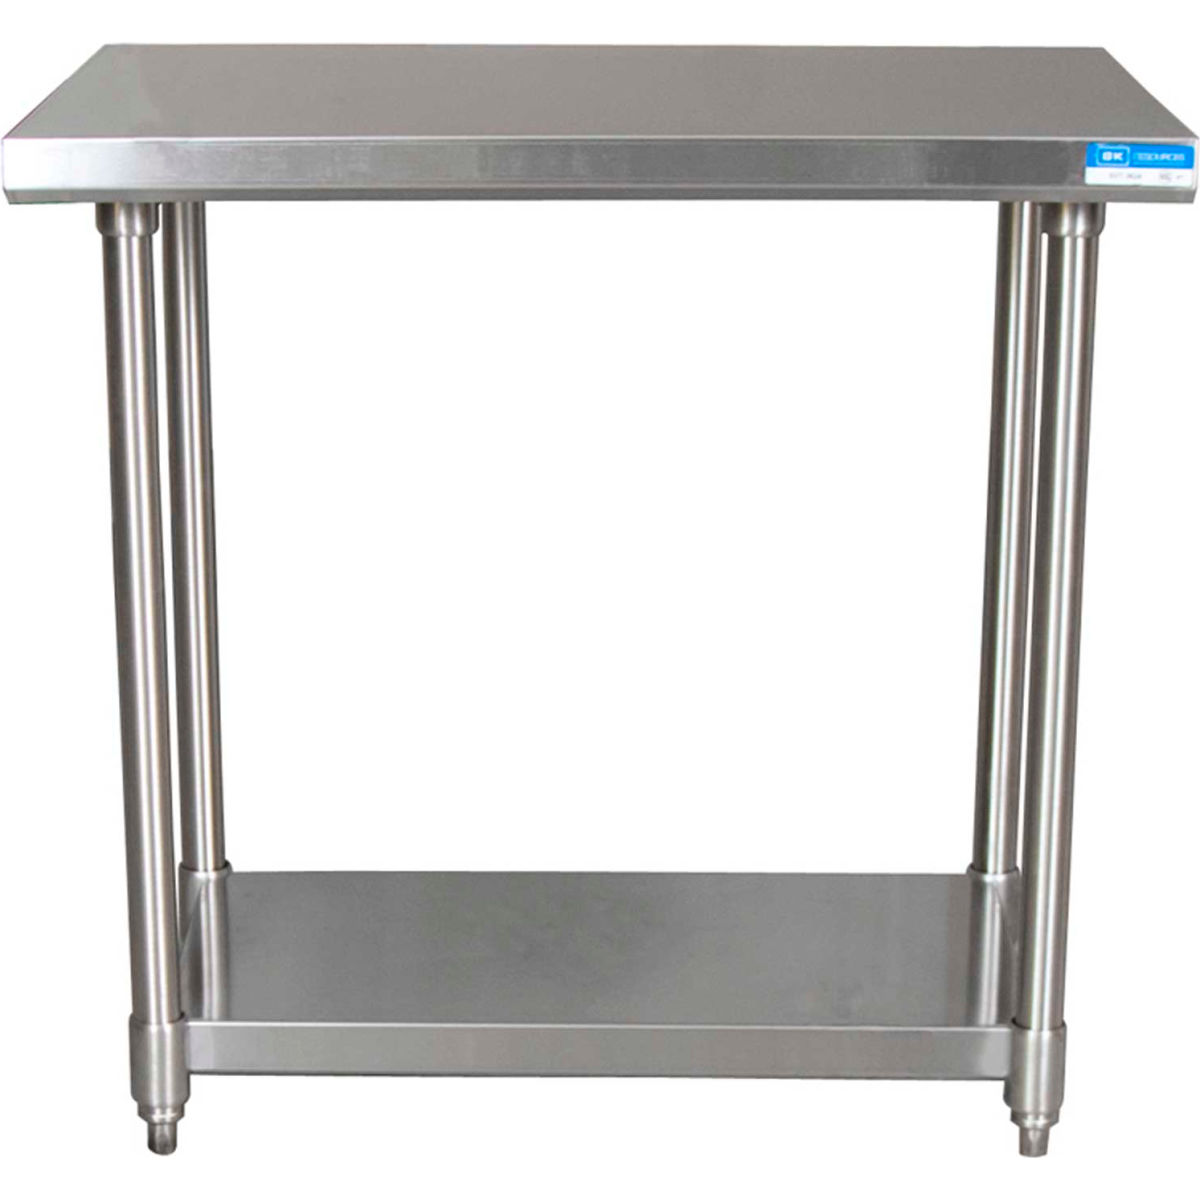 Picture of BK Resources B1516252 16 Gauge 304 Series Stainless Workbench with Adjustable Undershelf - 30 x 24 in.